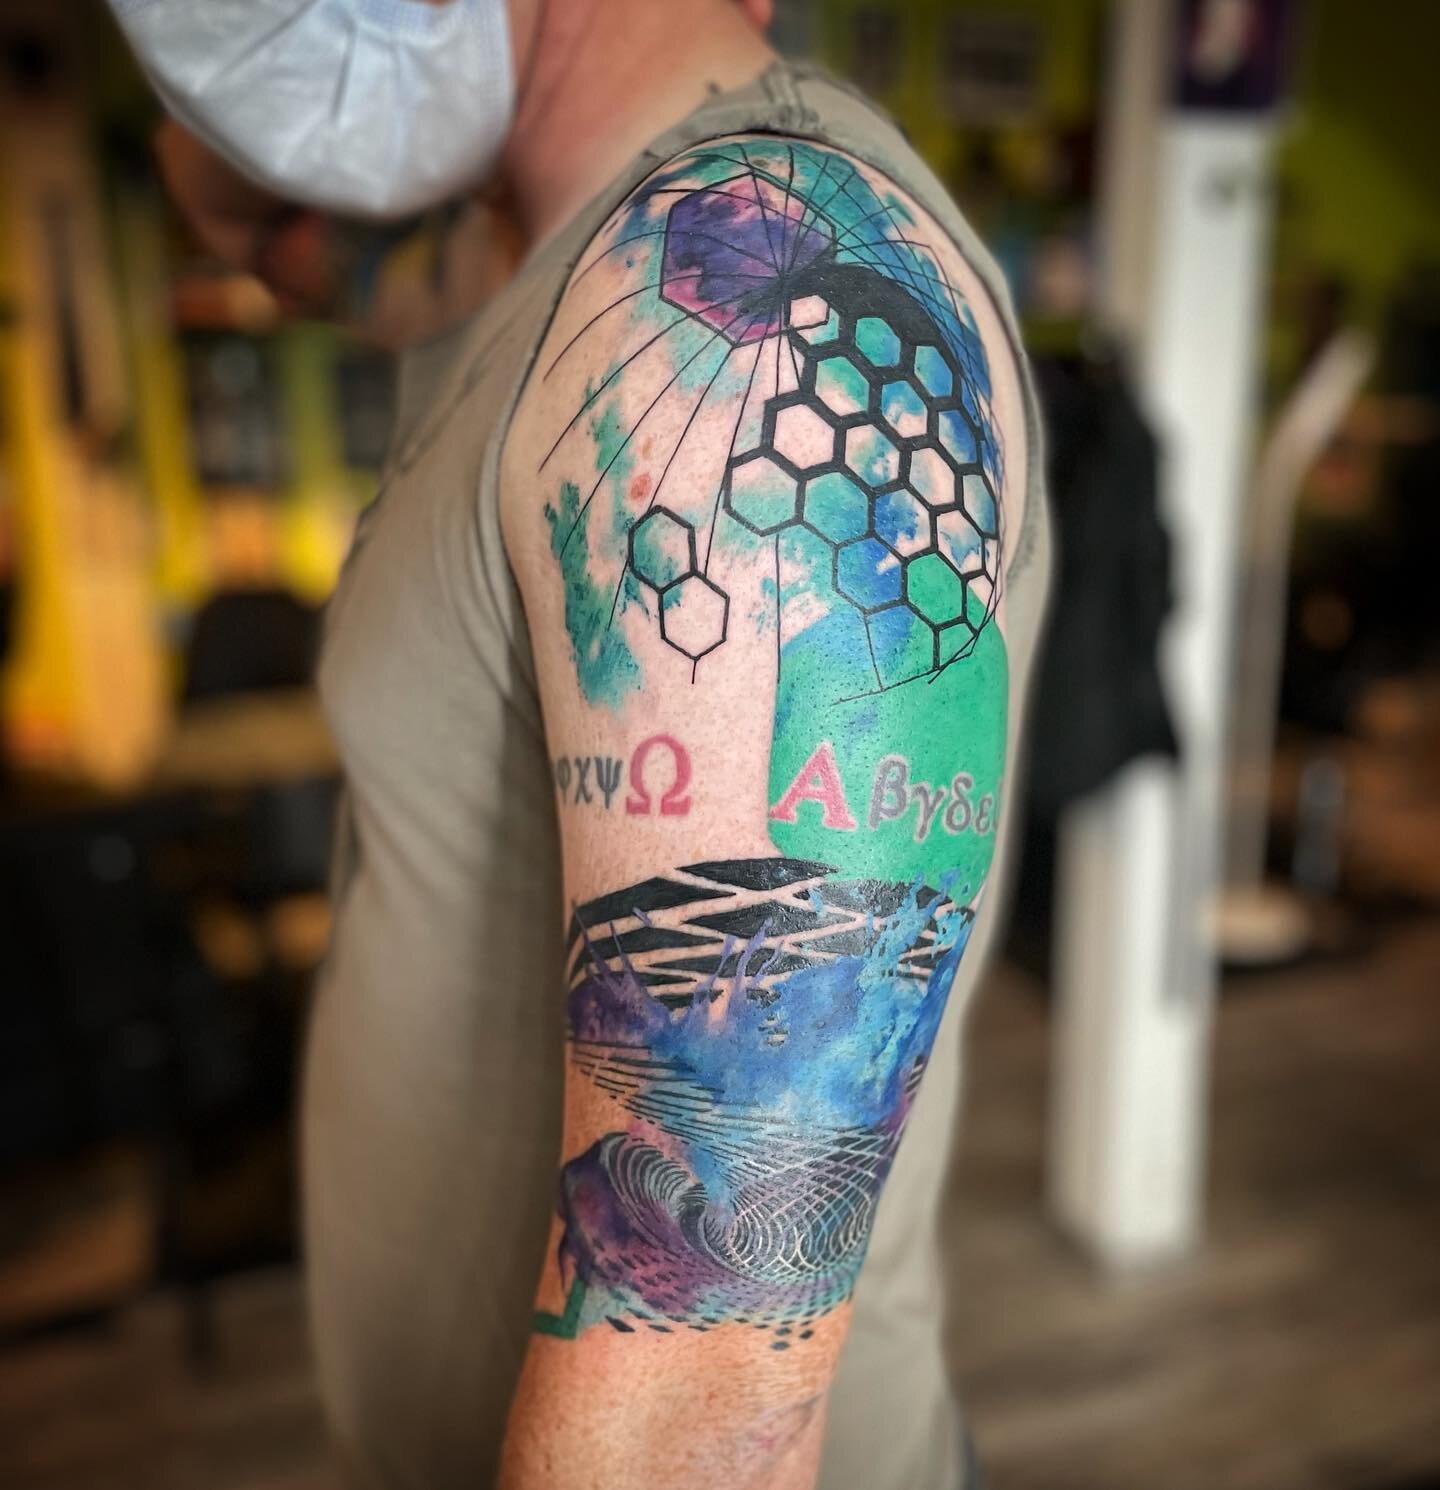 2nd session on this half sleeve in progress. The lettering was an existing tattoo not done by me.
.
.
.
.
.
#tattoo #halfsleeve #watercolortattoo #abstracttattoo #colortattoo #colortattooartist #bayareatattooartist #graphictattoo